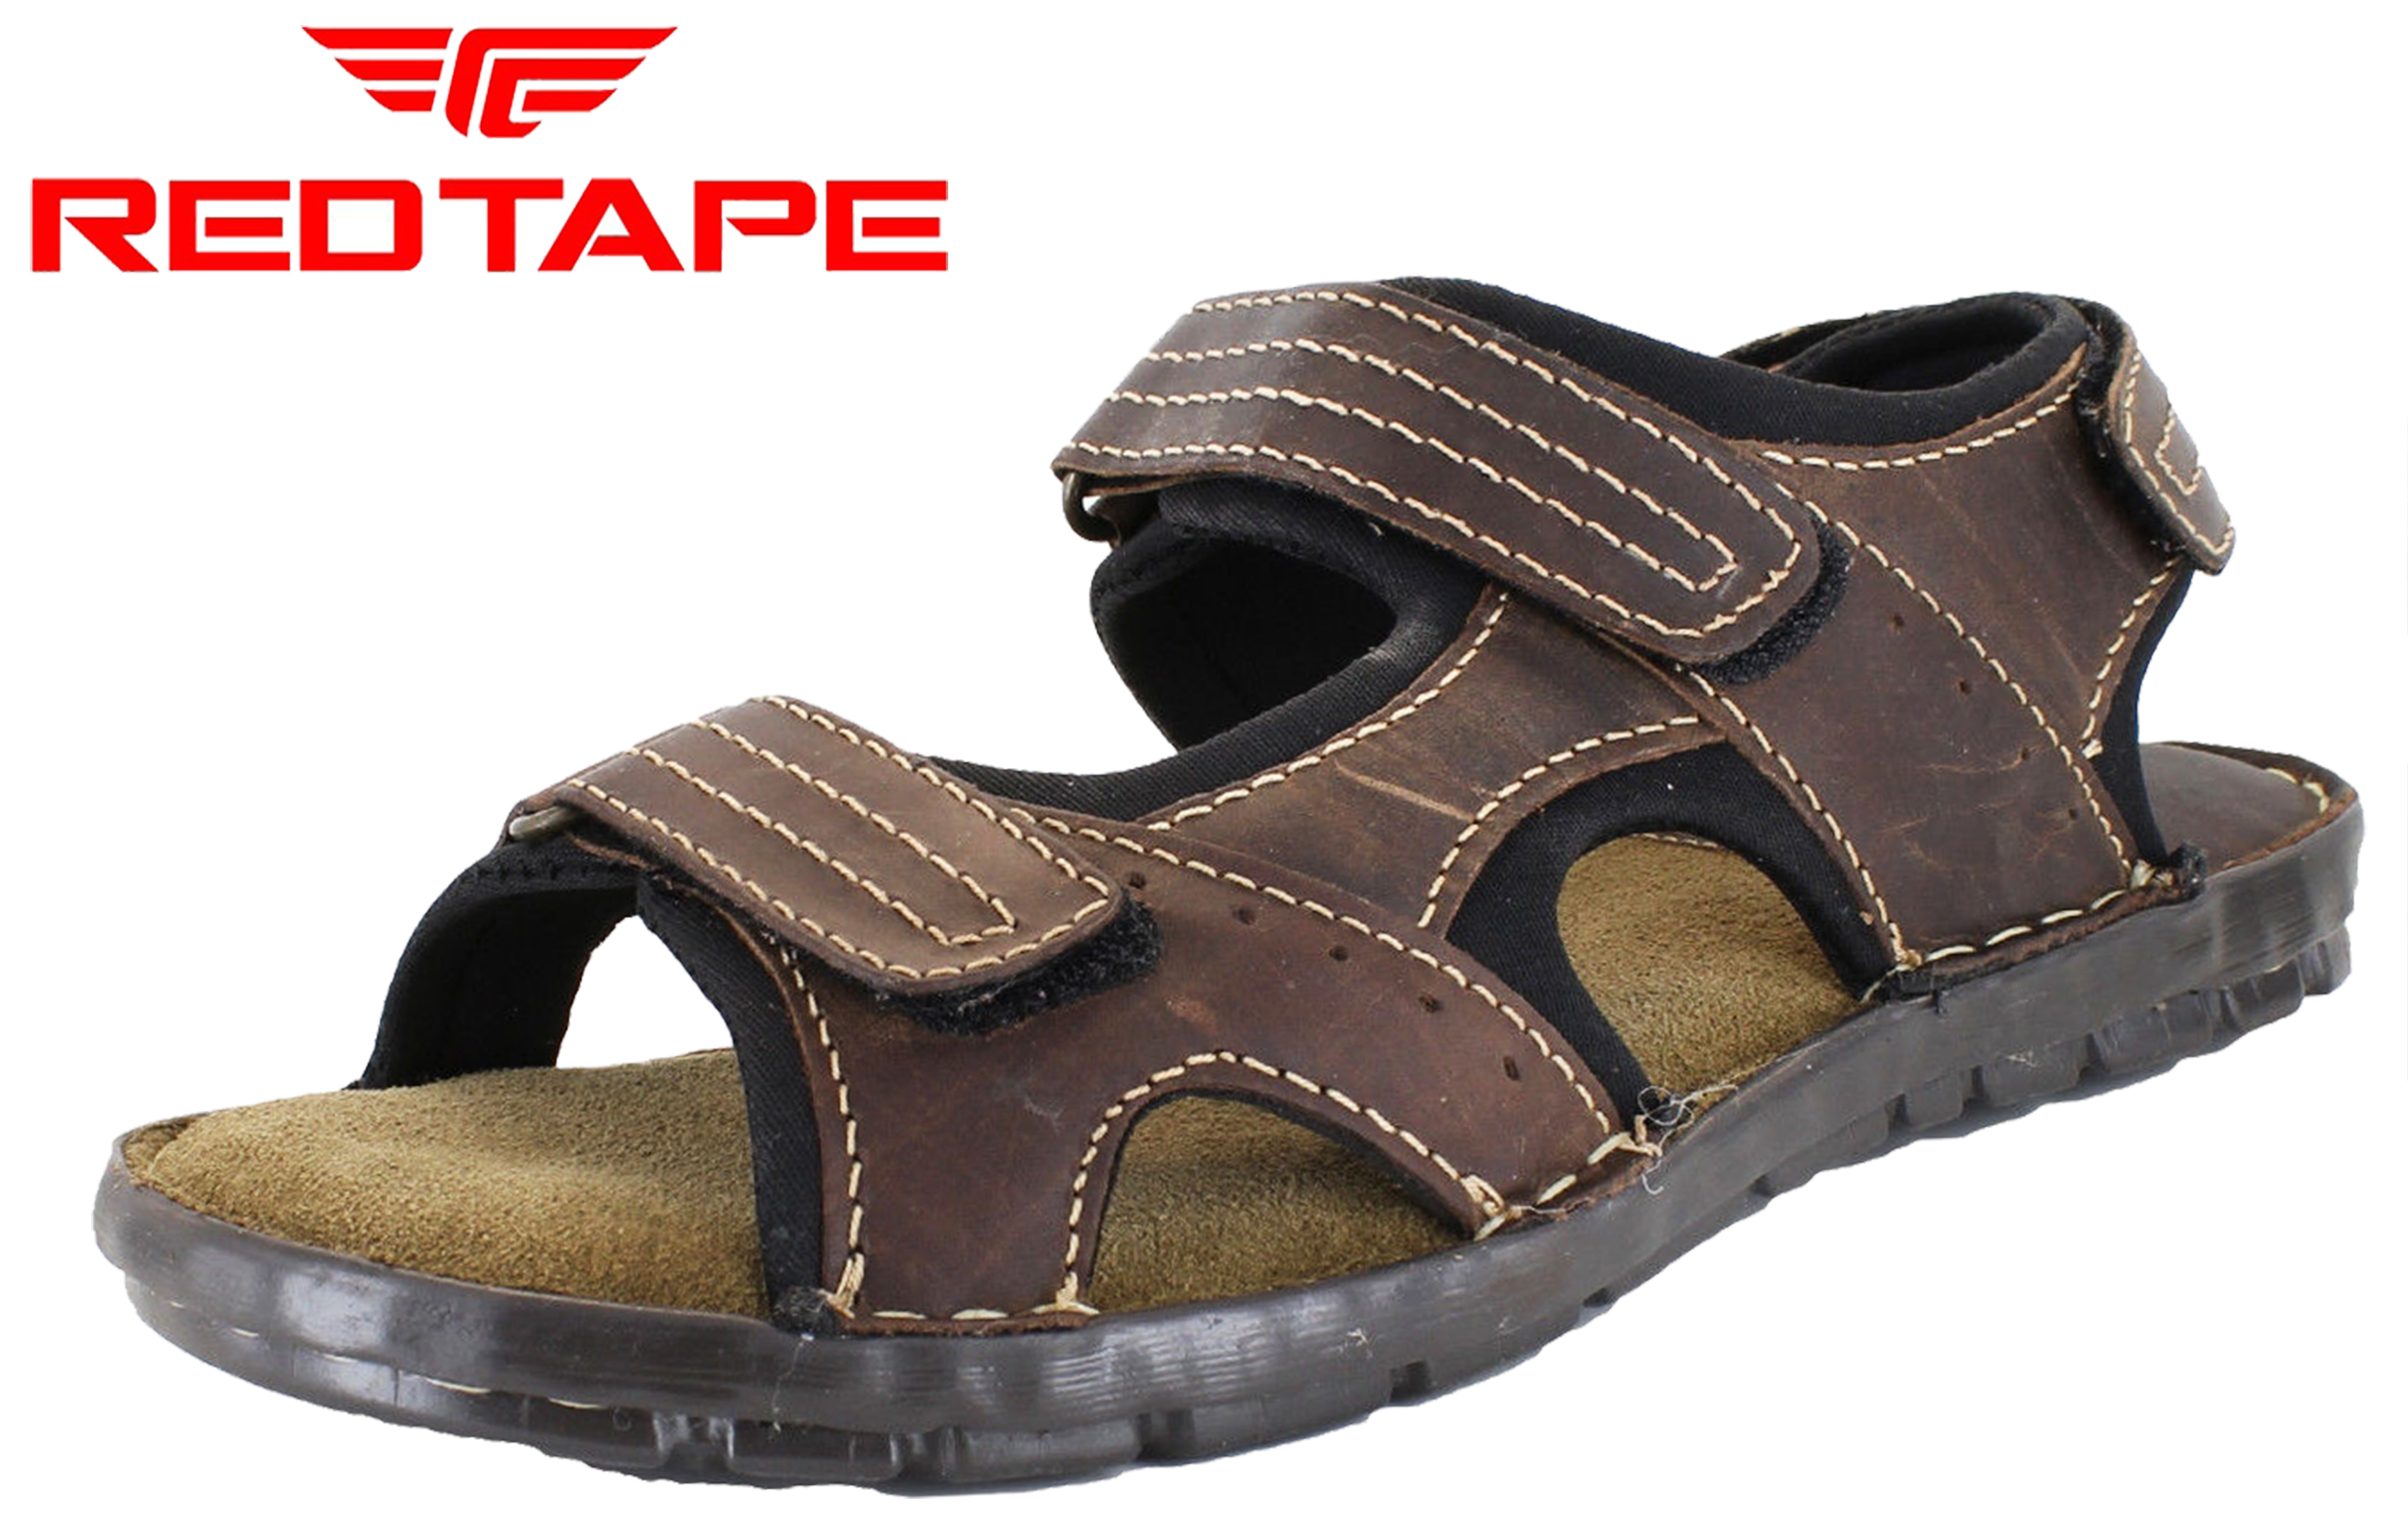 red tape men's leather sandals